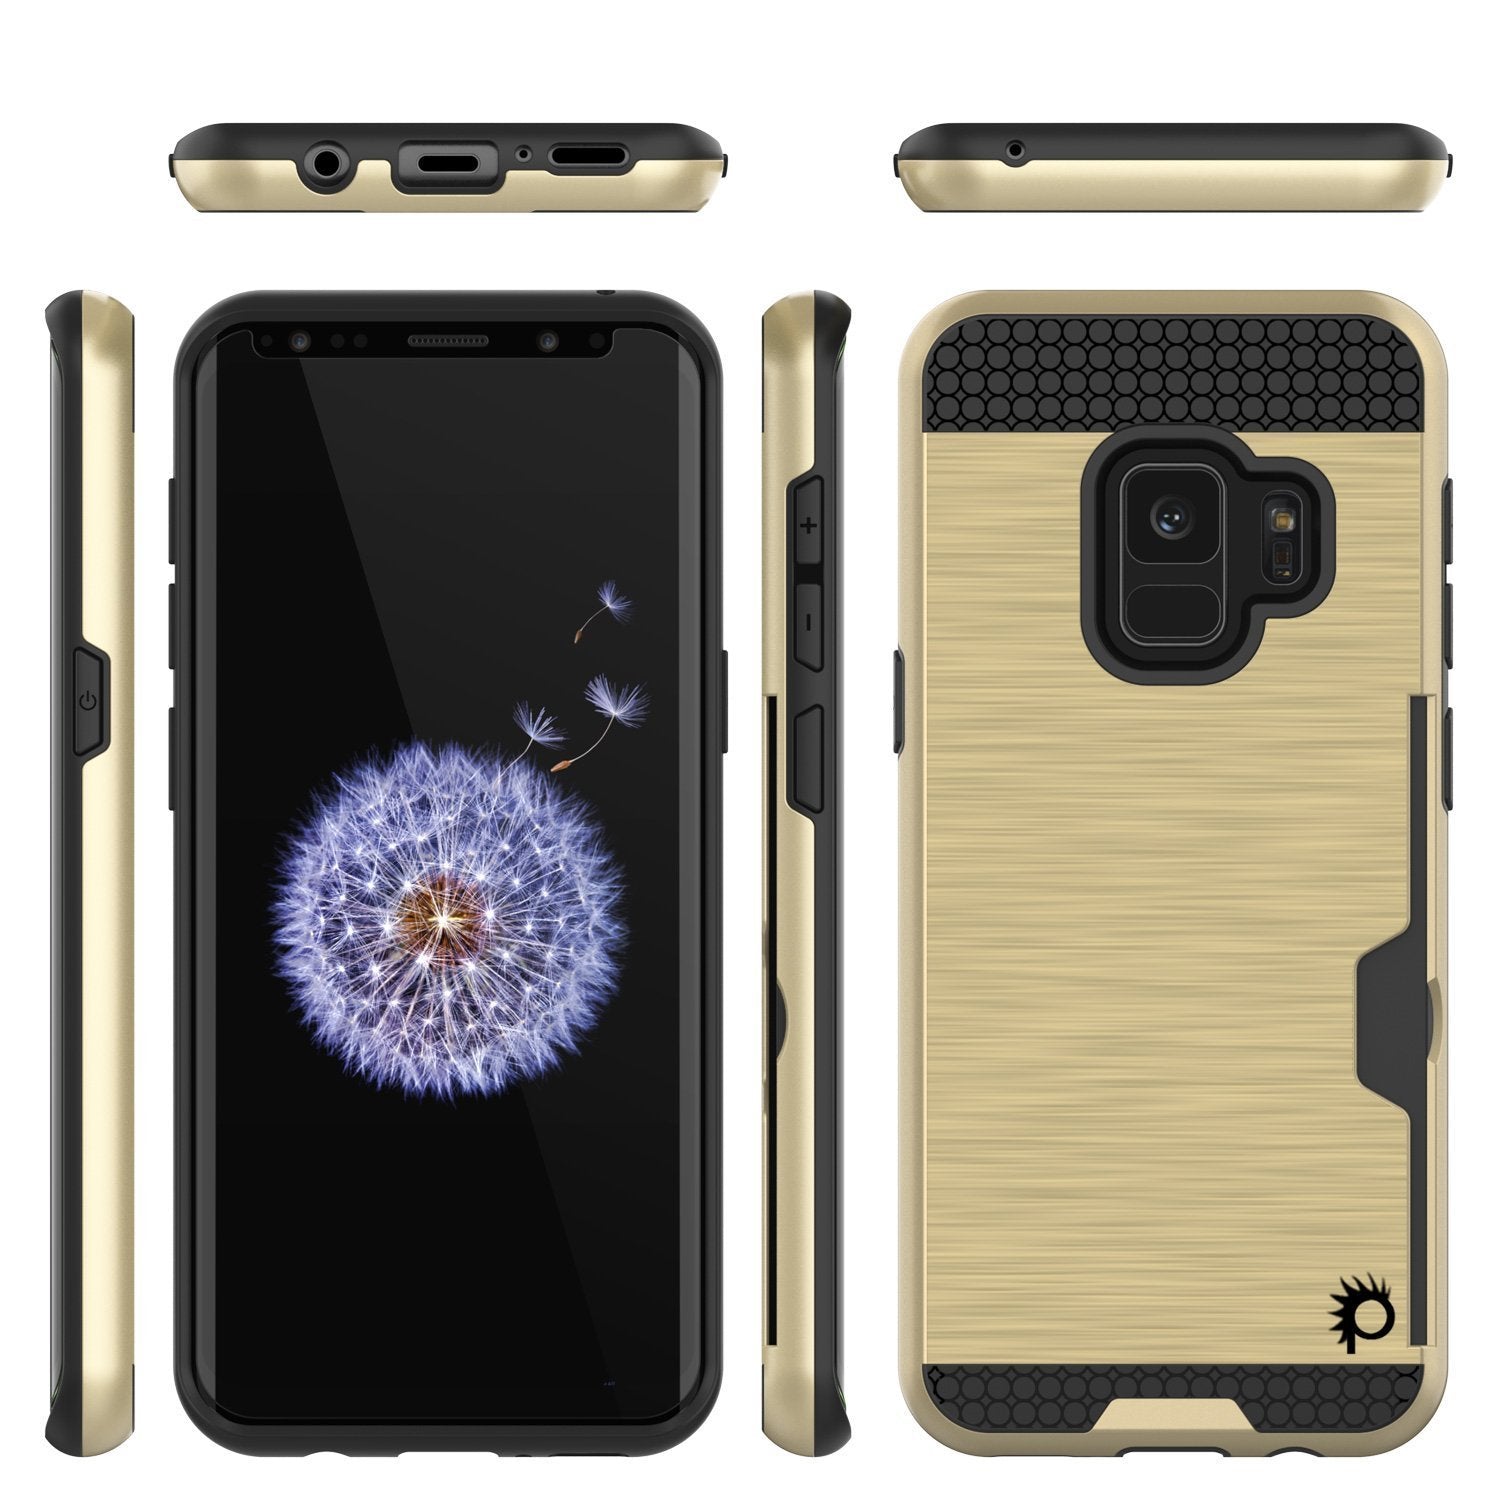 Galaxy S9 Case, PUNKcase [SLOT Series] [Slim Fit] Dual-Layer Armor Cover w/Integrated Anti-Shock System, Credit Card Slot [Gold]